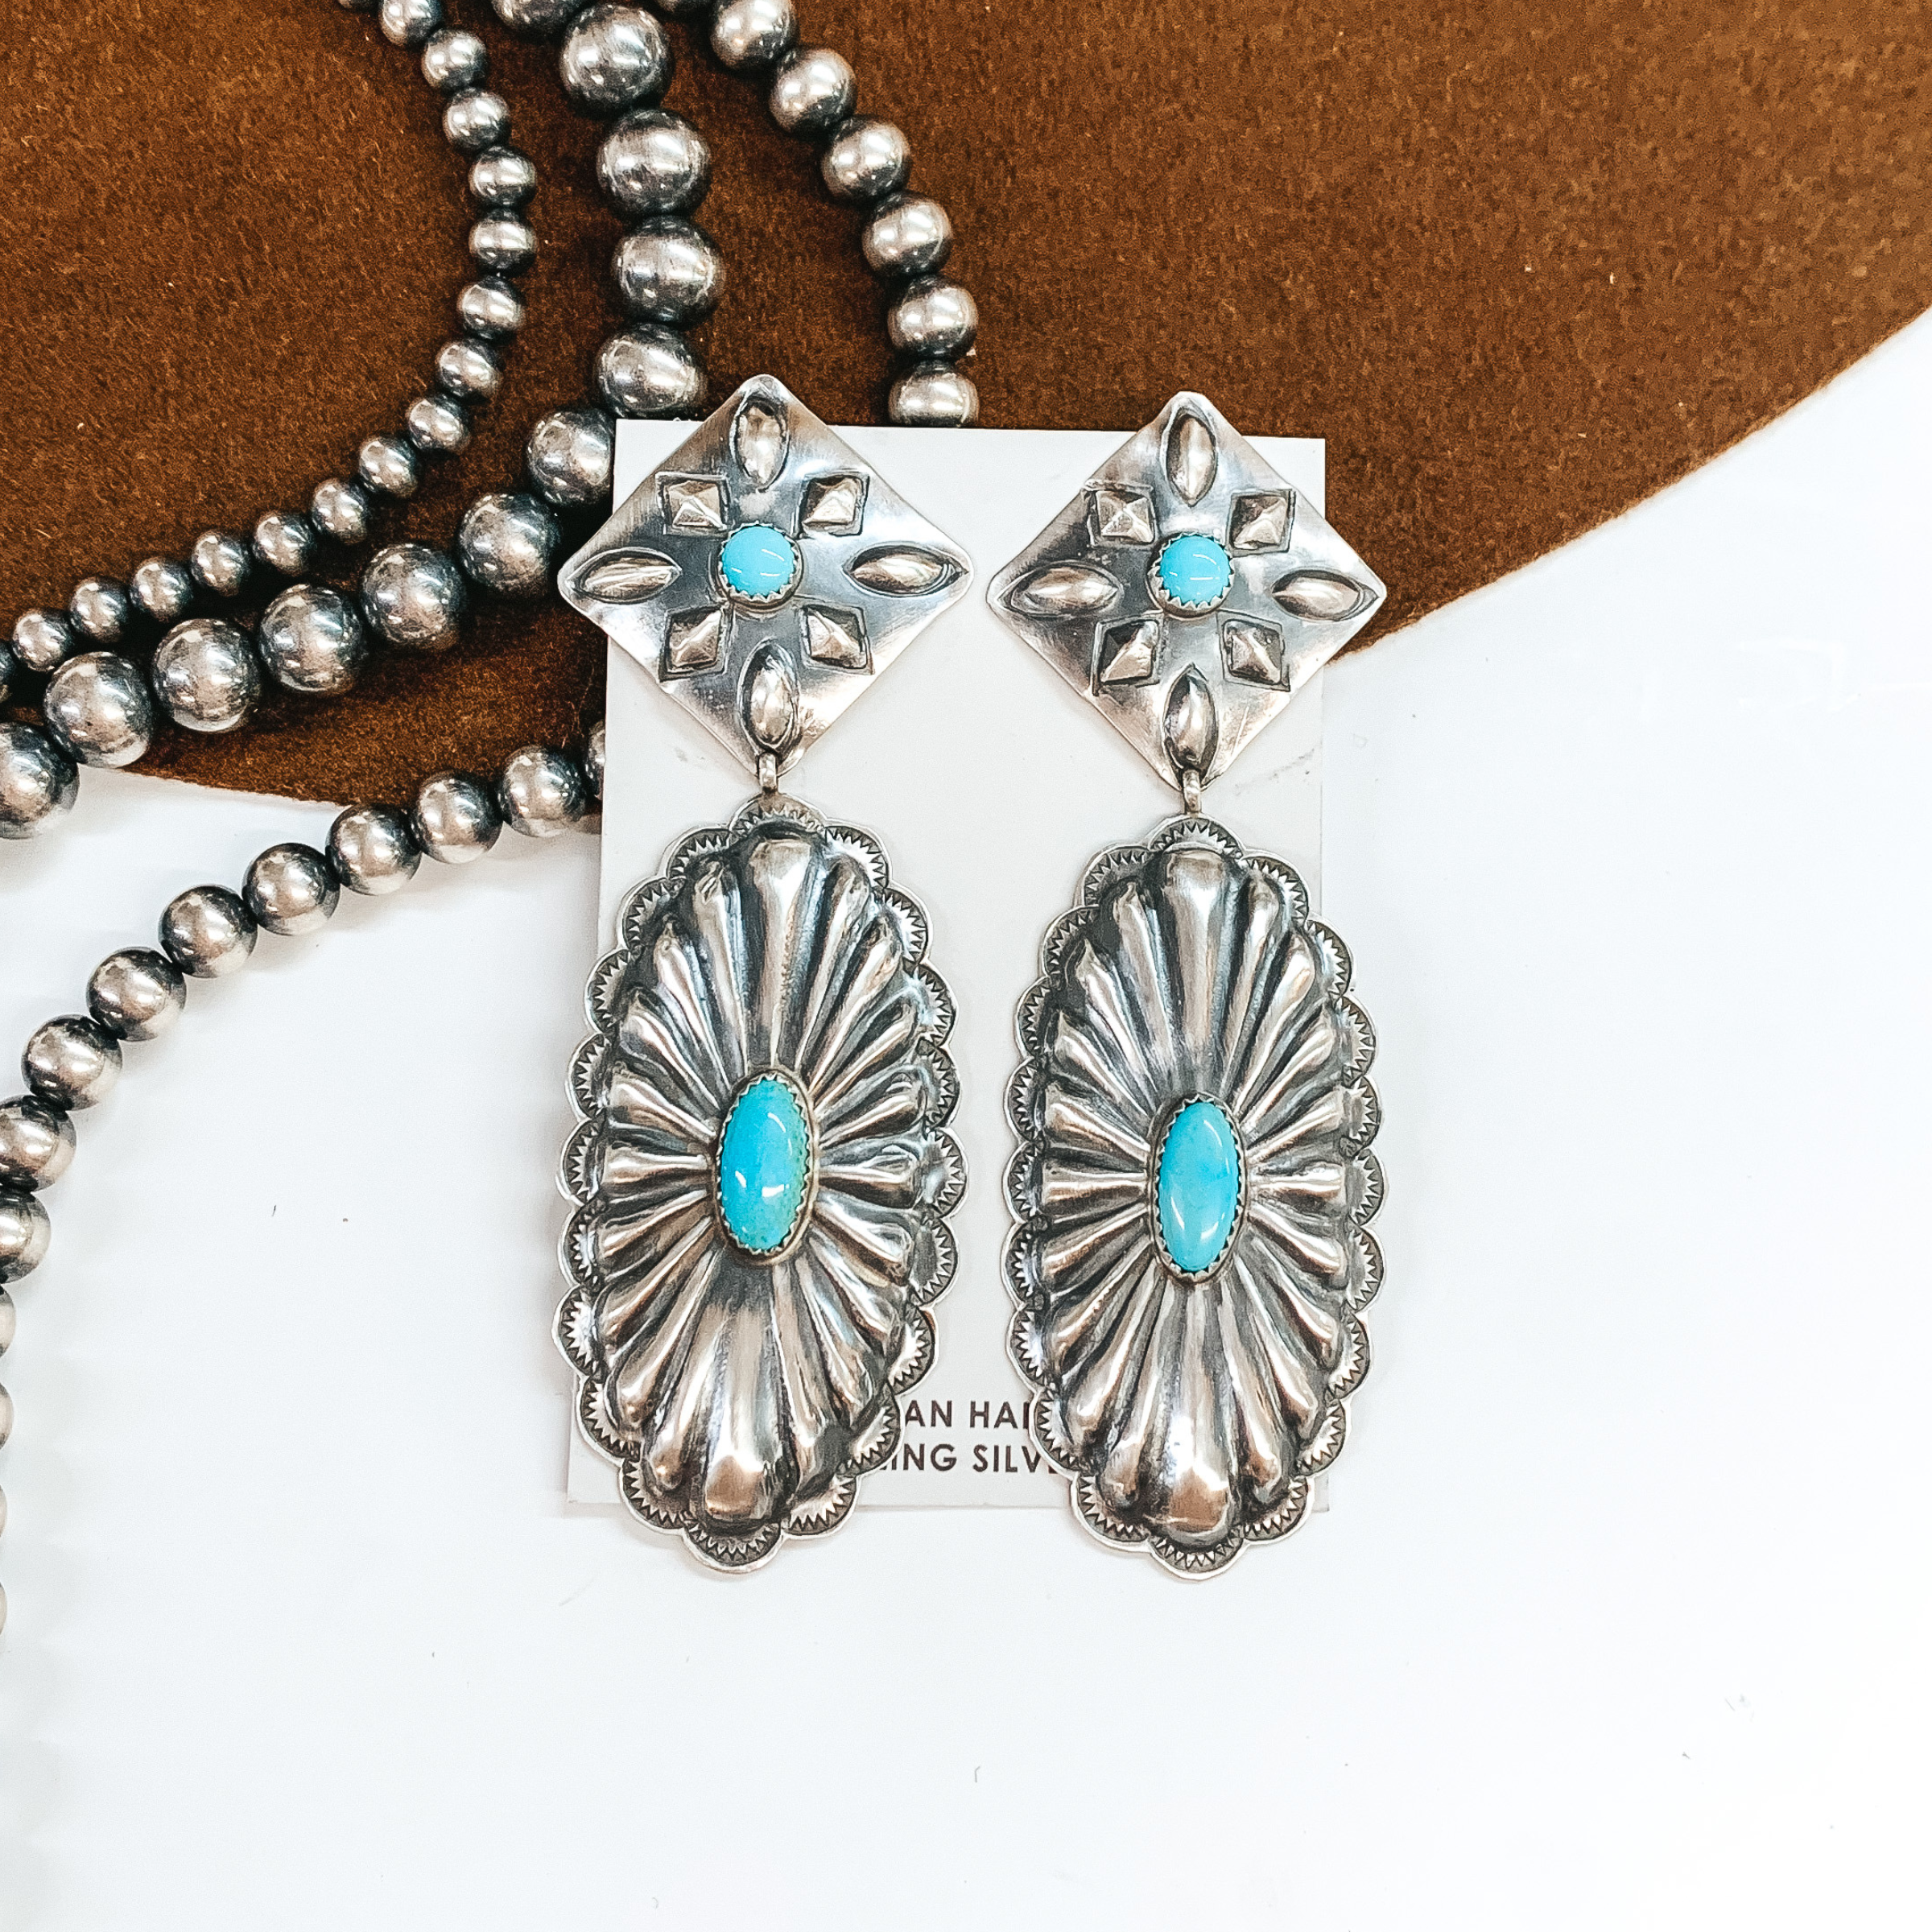 RL Begay | Navajo Handmade Sterling Silver Square Concho Post Earrings with Oval Concho Dangle and Turquoise Stones - Giddy Up Glamour Boutique